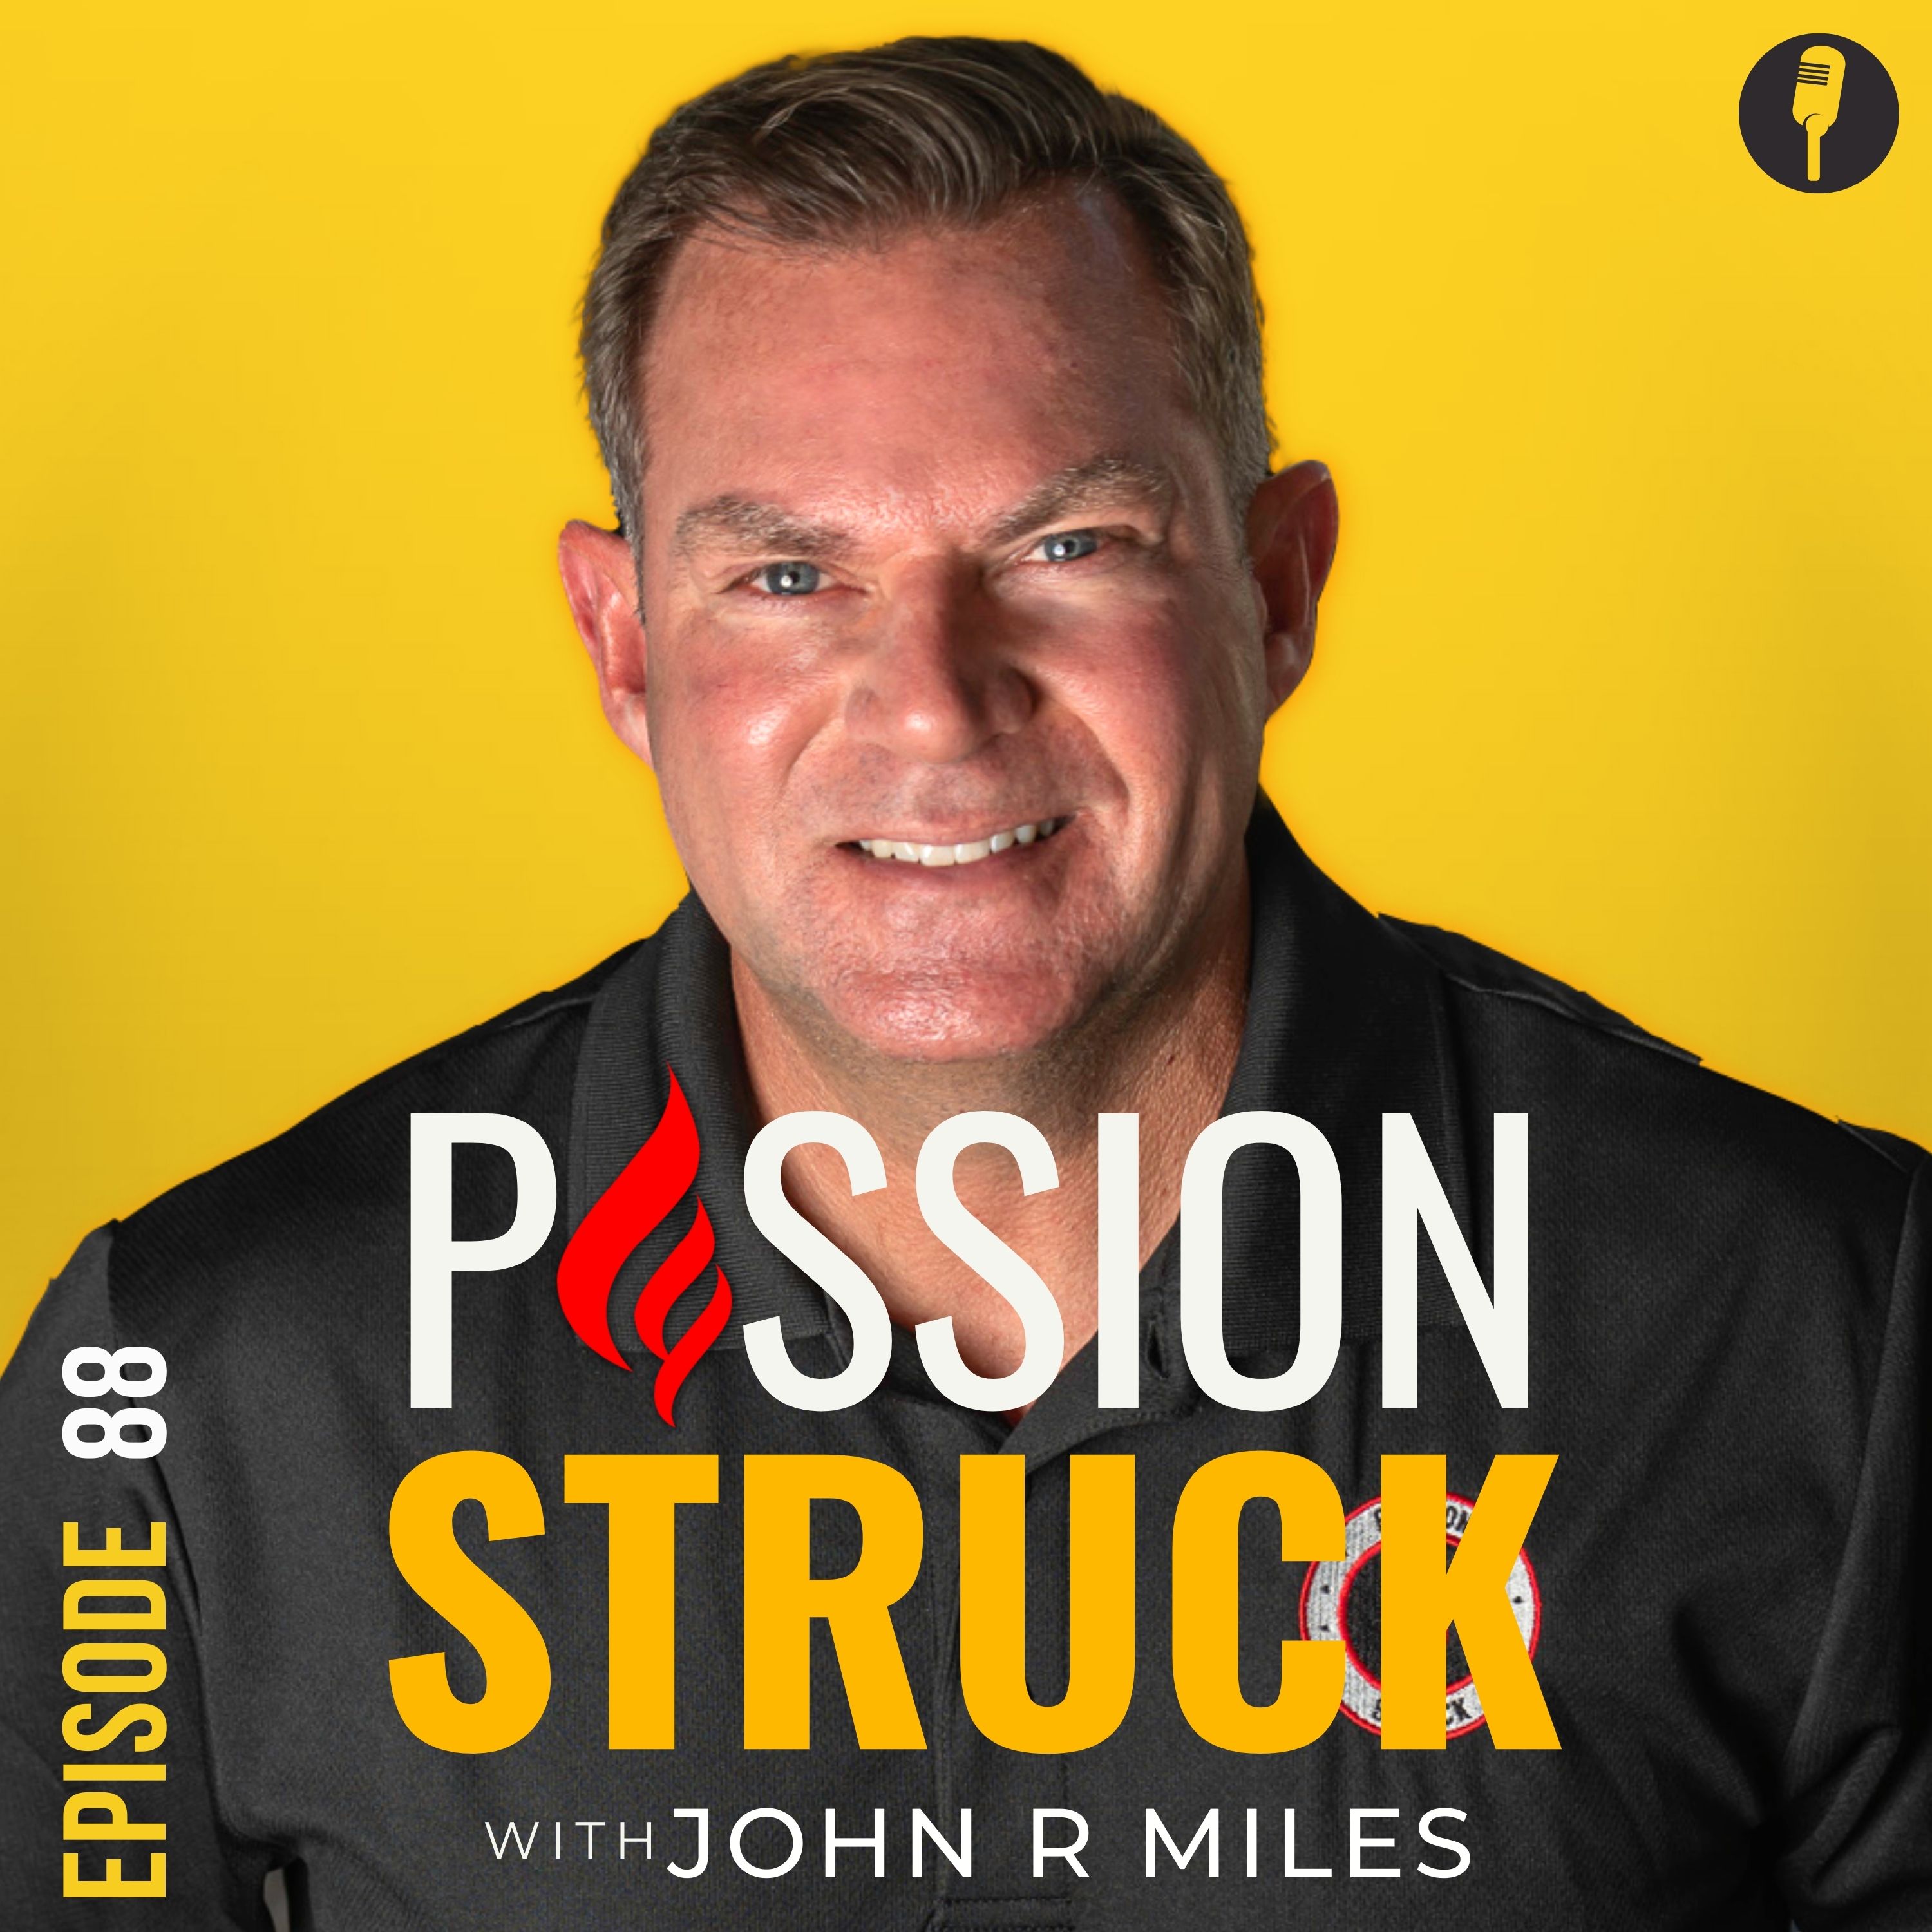 Passion Struck Podcast album cover with John R. Miles for episode 88 on Stop Hiding the True You